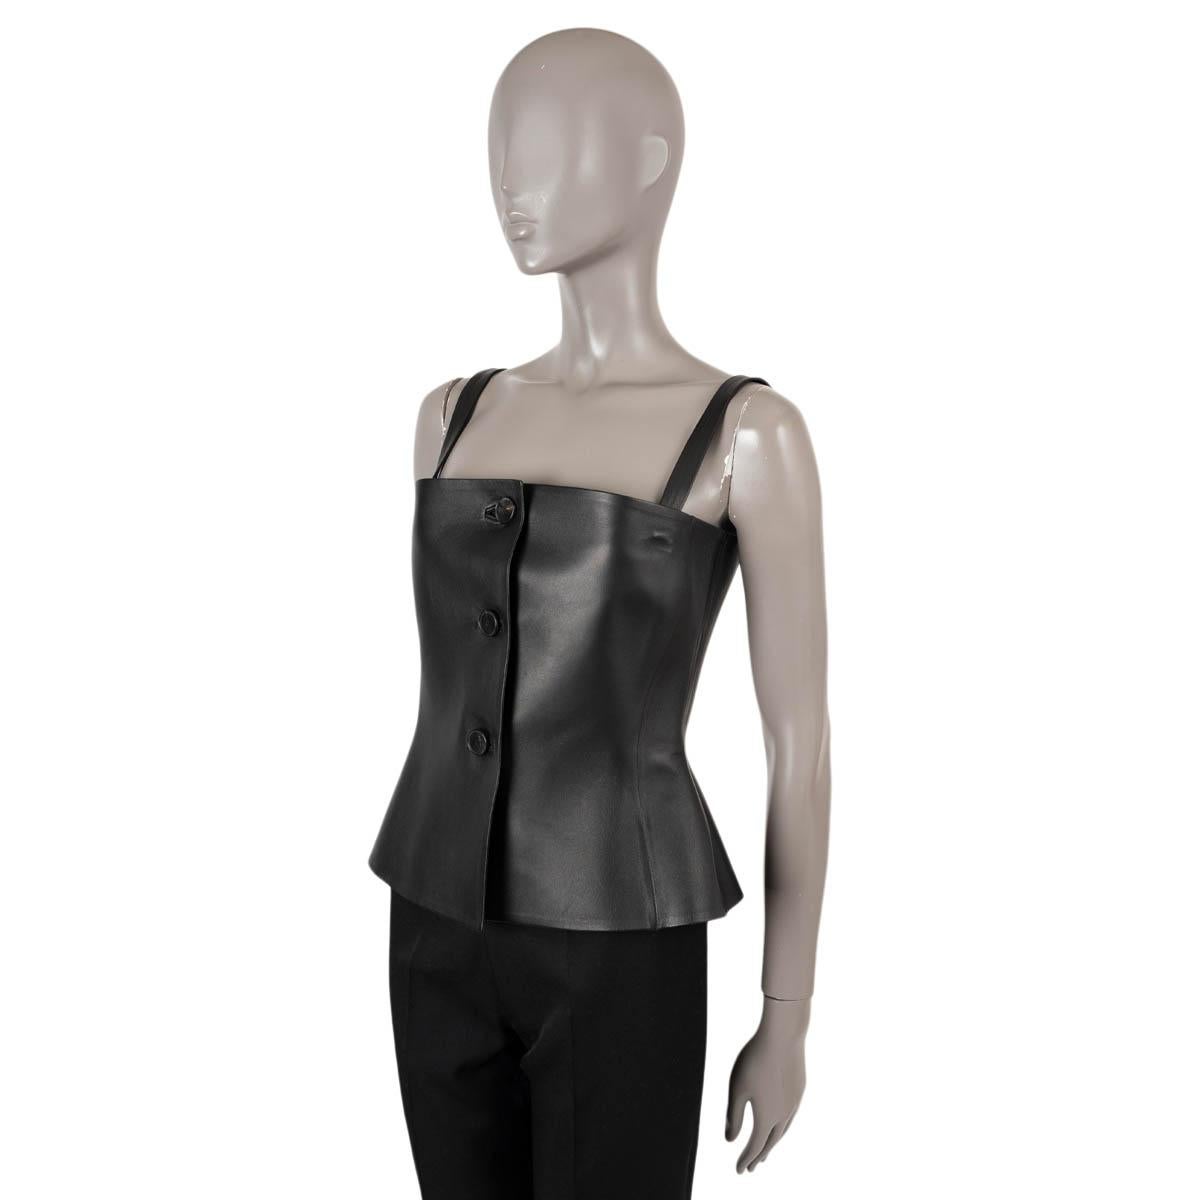 100% authentic Christian Dior bustier tank top in black lambskin leather (100%). Features removable shoulder straps. Closes with buttons on the front and is unlined. Has been worn and is in excellent condition. CD logo belt is missing. 

2020